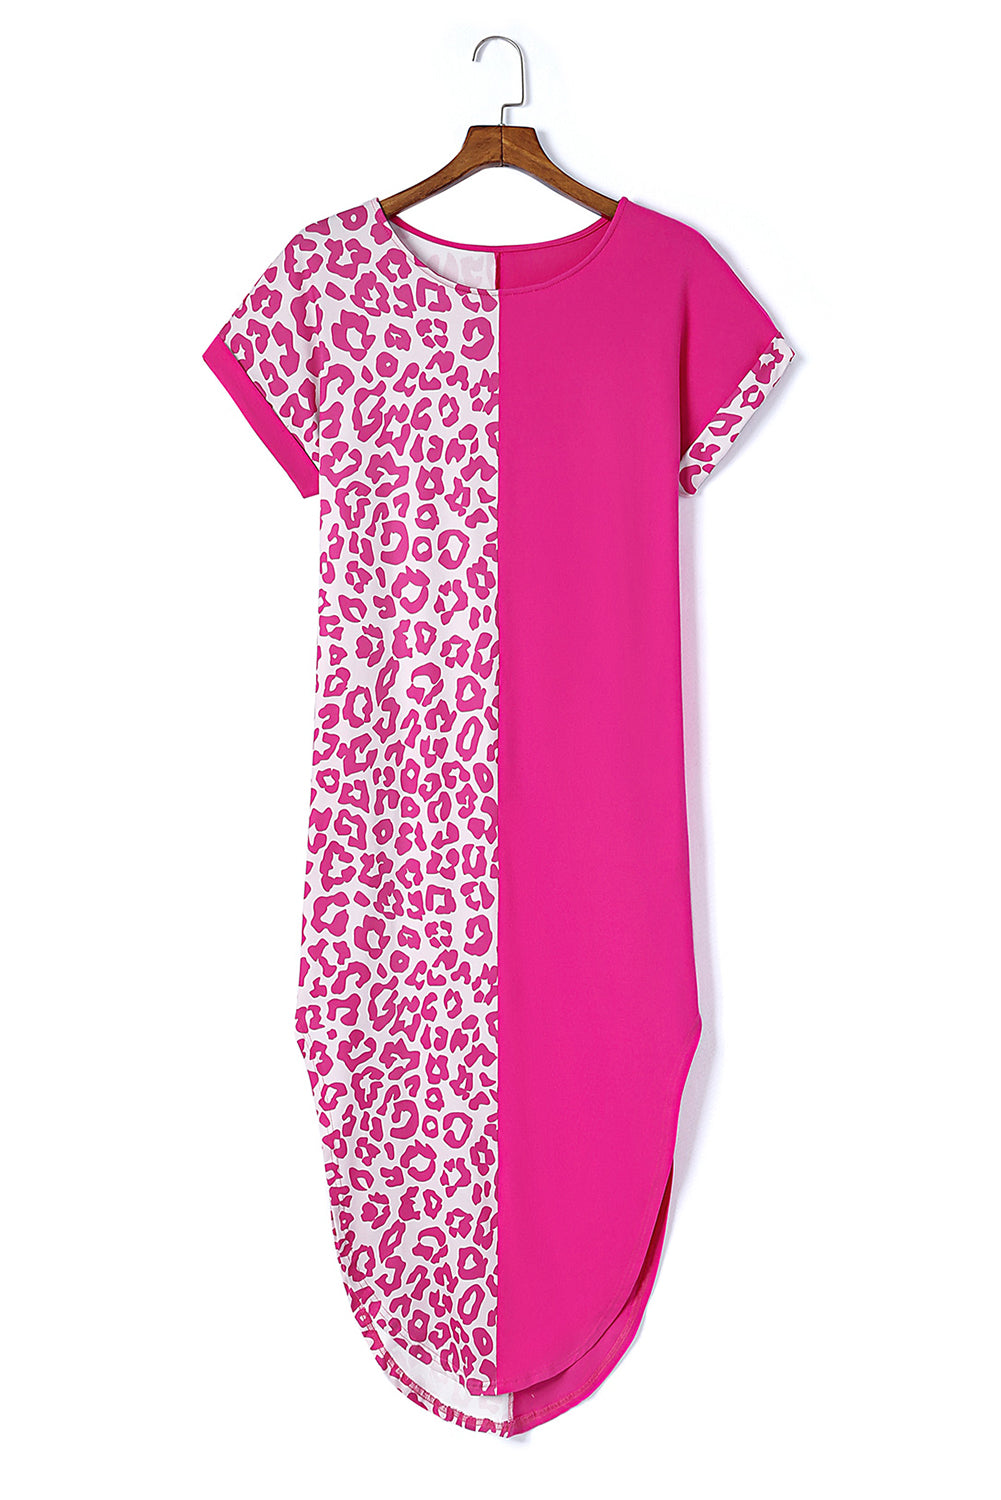 Rose Contrast Solid Leopard Short Sleeve T-shirt Dress with Slits